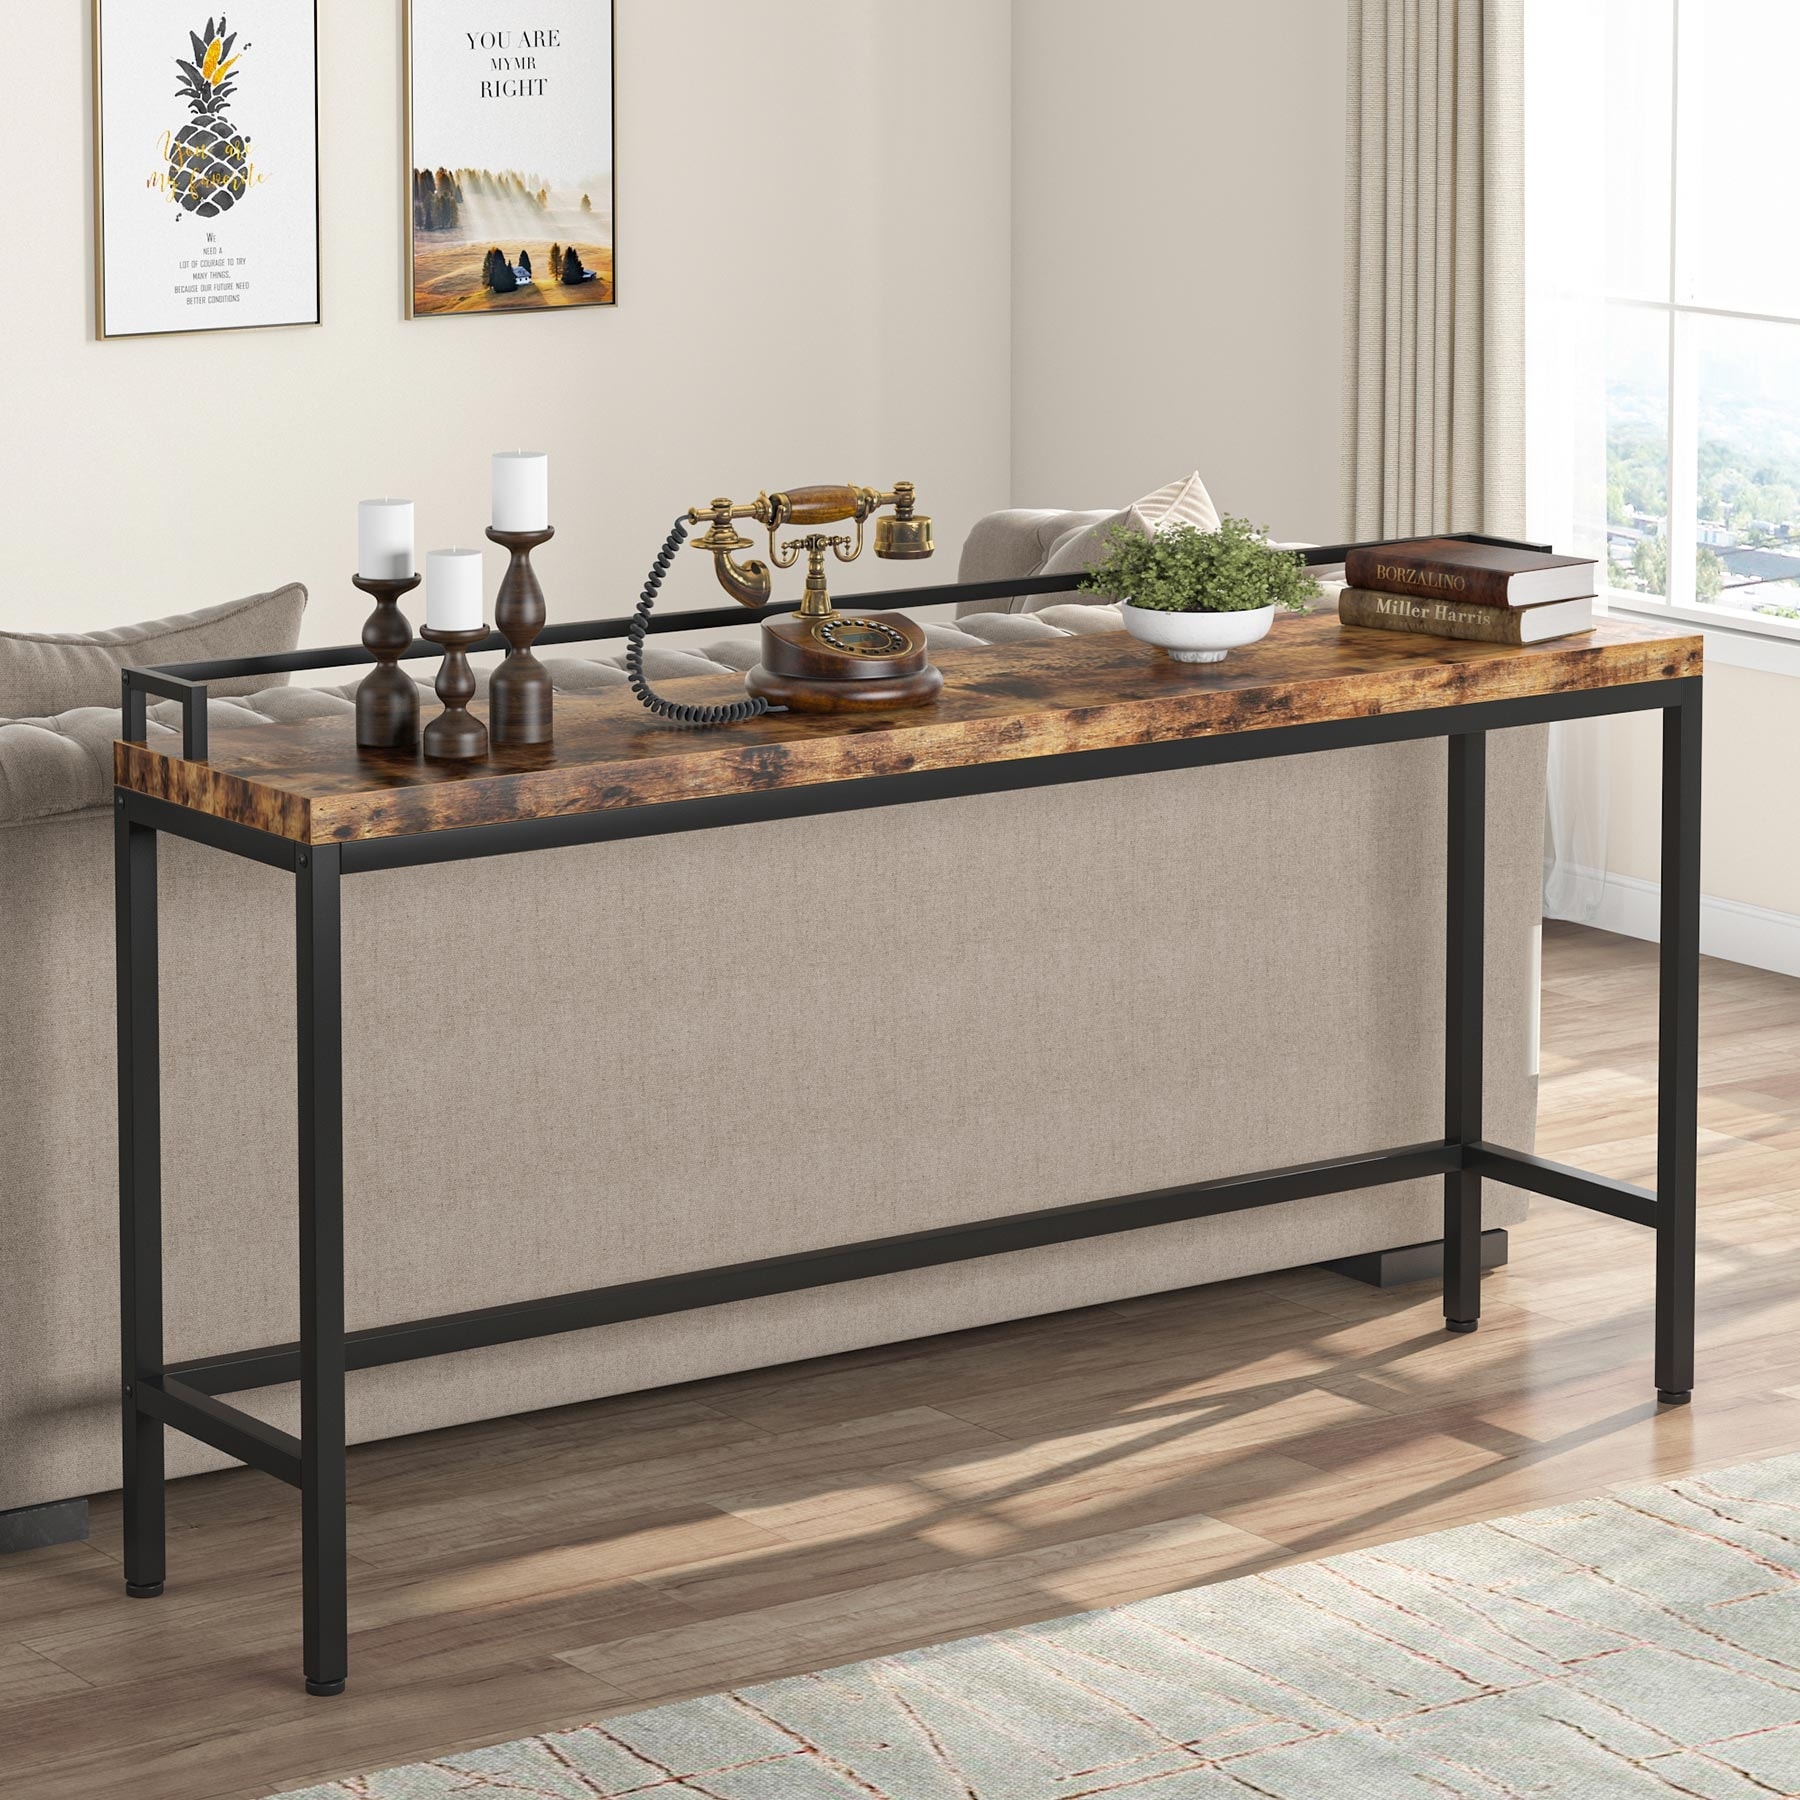 https://ak1.ostkcdn.com/images/products/is/images/direct/1944b11593c16f873c4e04af9bbf47fbeb99e0a0/70.9-inch-Long-Narrow-Console-Table-Behind-Sofa-Couch%2C-Rustic-Entry-Table.jpg